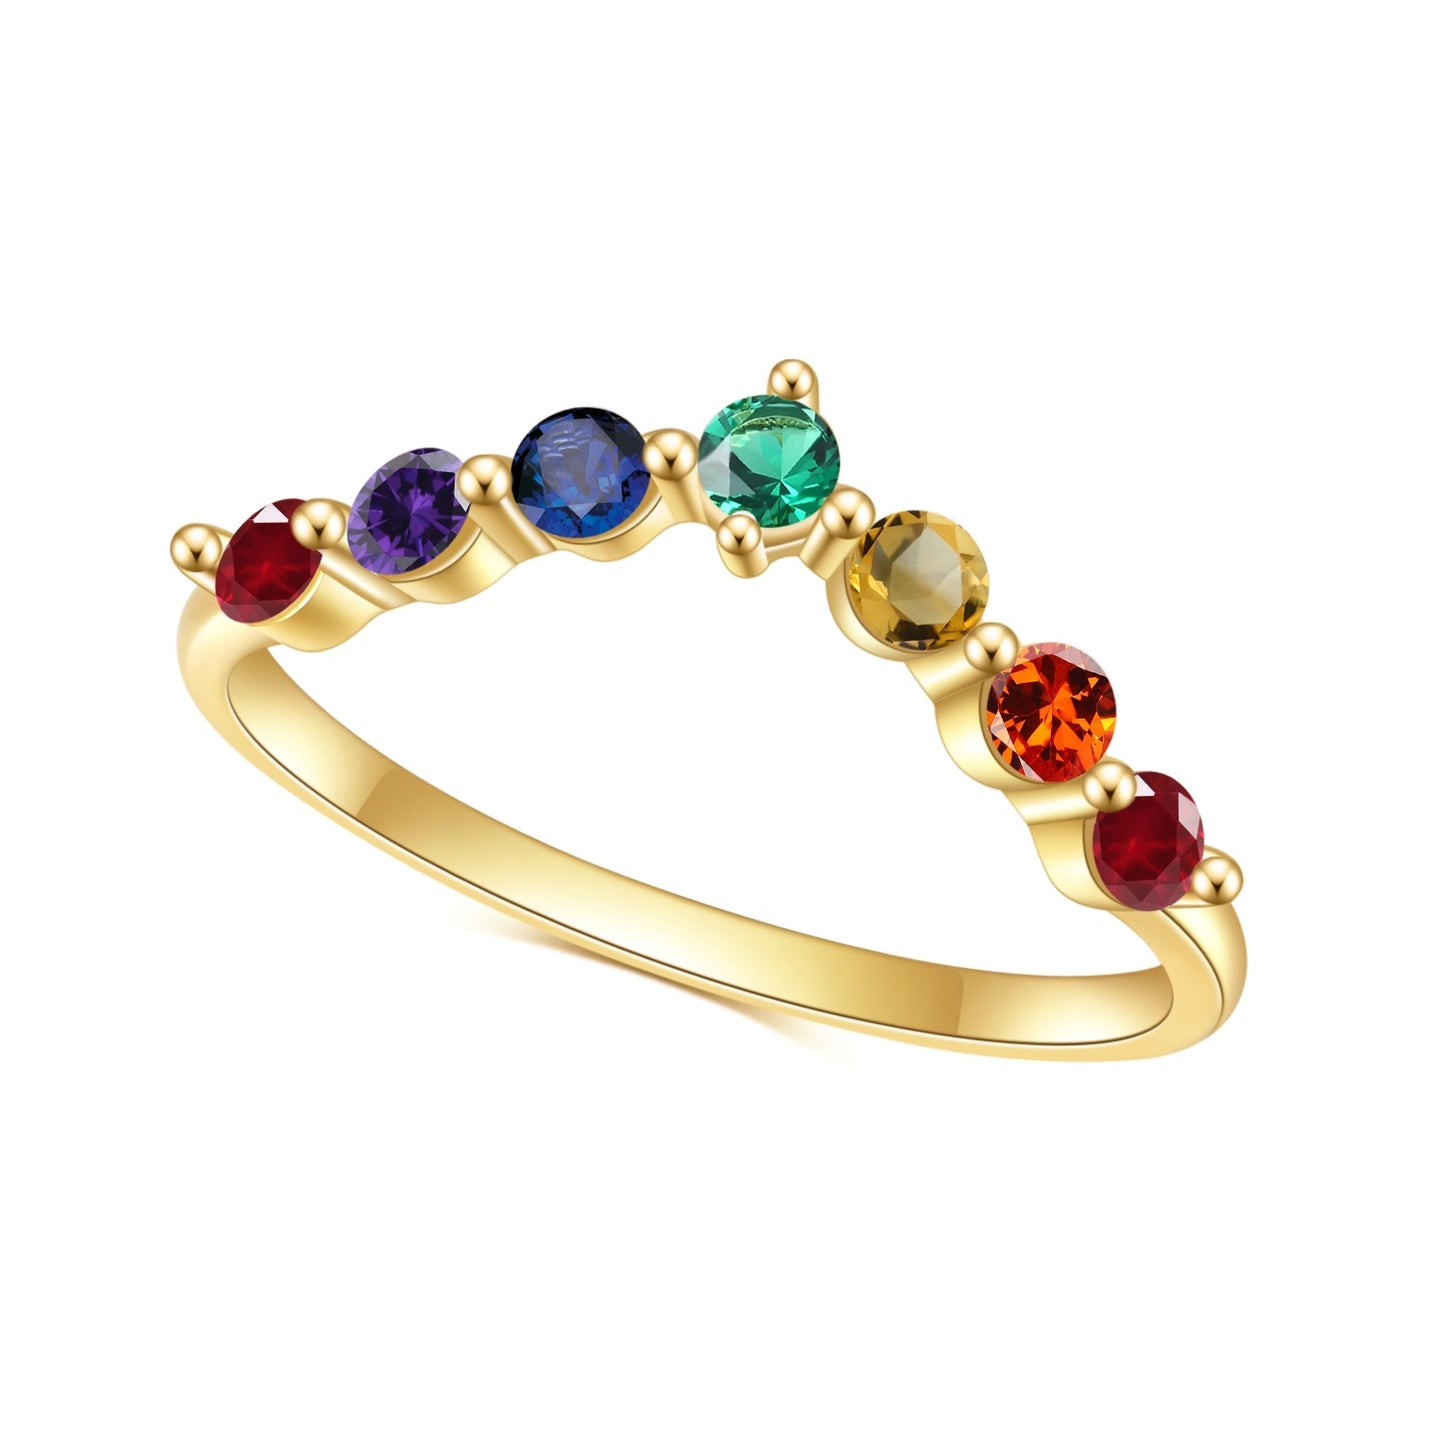 Golden Luxury V Shape 14k Gold Plated S925 Sterling Silver Inlaid Colored Gems Fashion and Simple Style Ring for Women